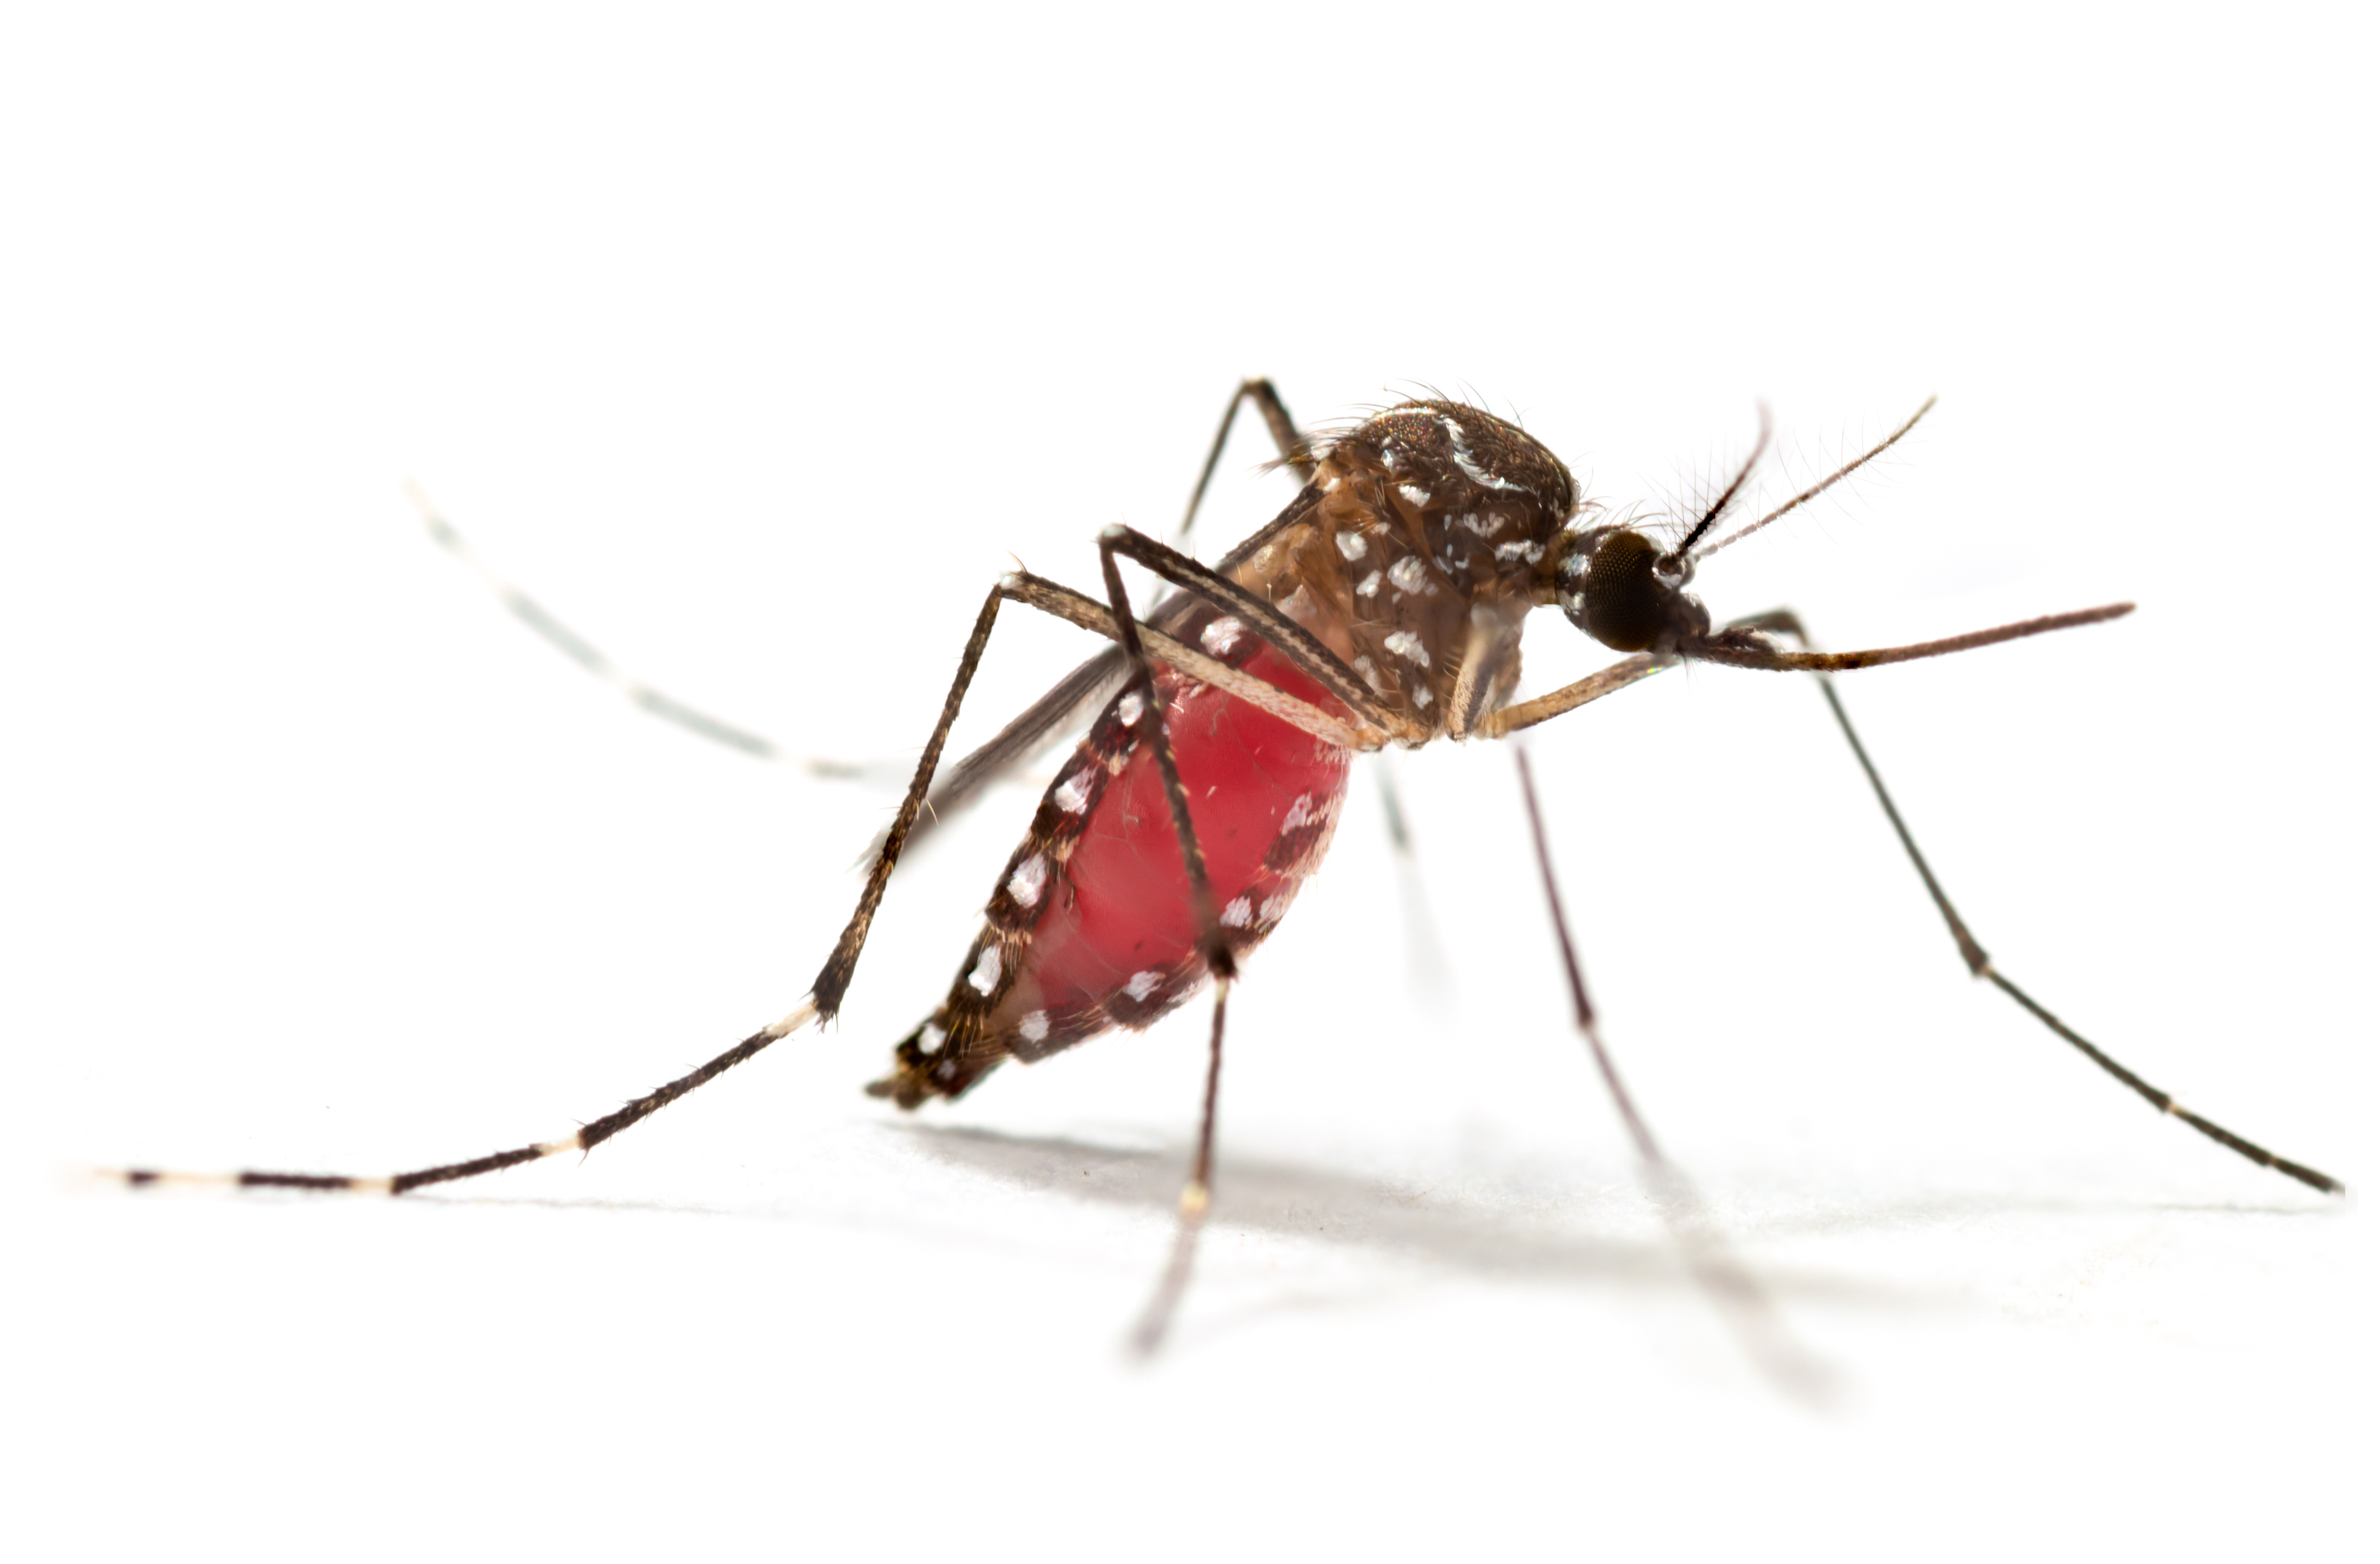 Adult mosquito after a blood meal